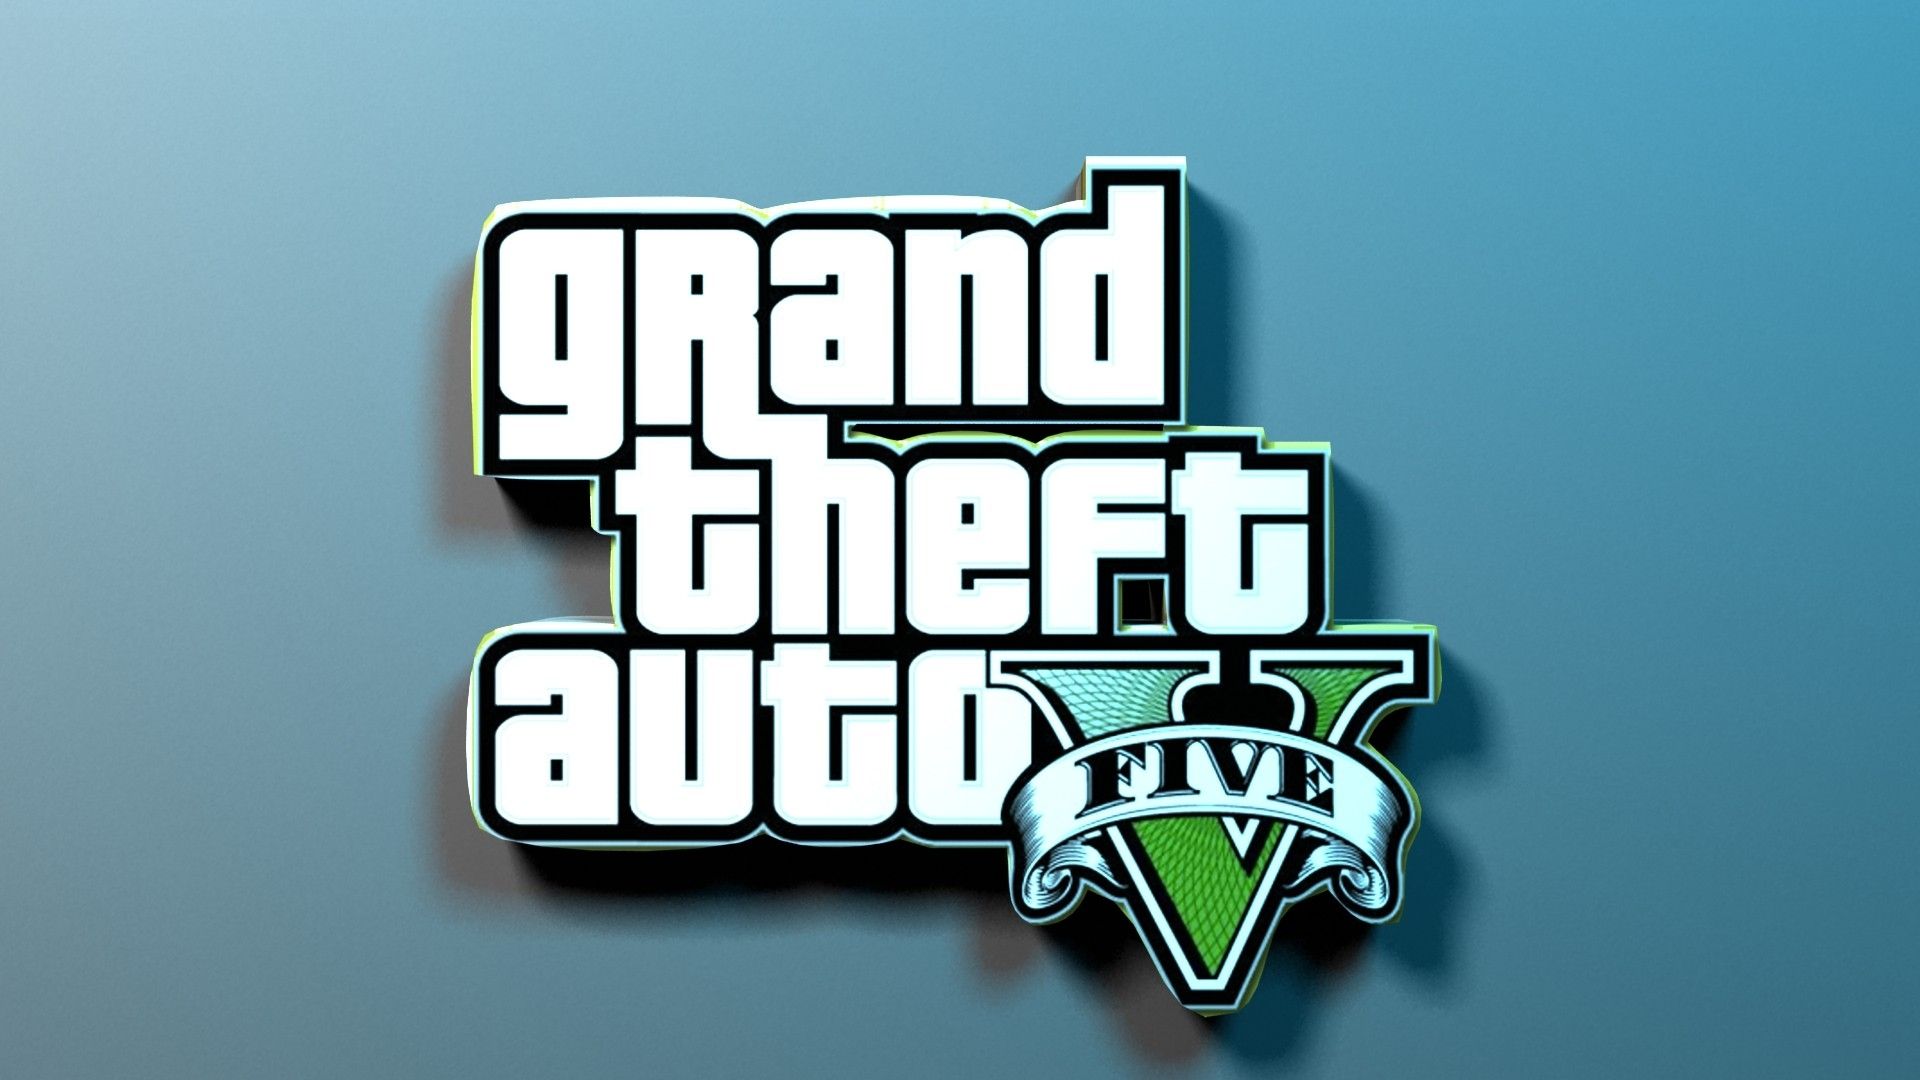 Download Wallpaper 1920x1080 Gta, Grand theft auto 5, Game, Shadow ...